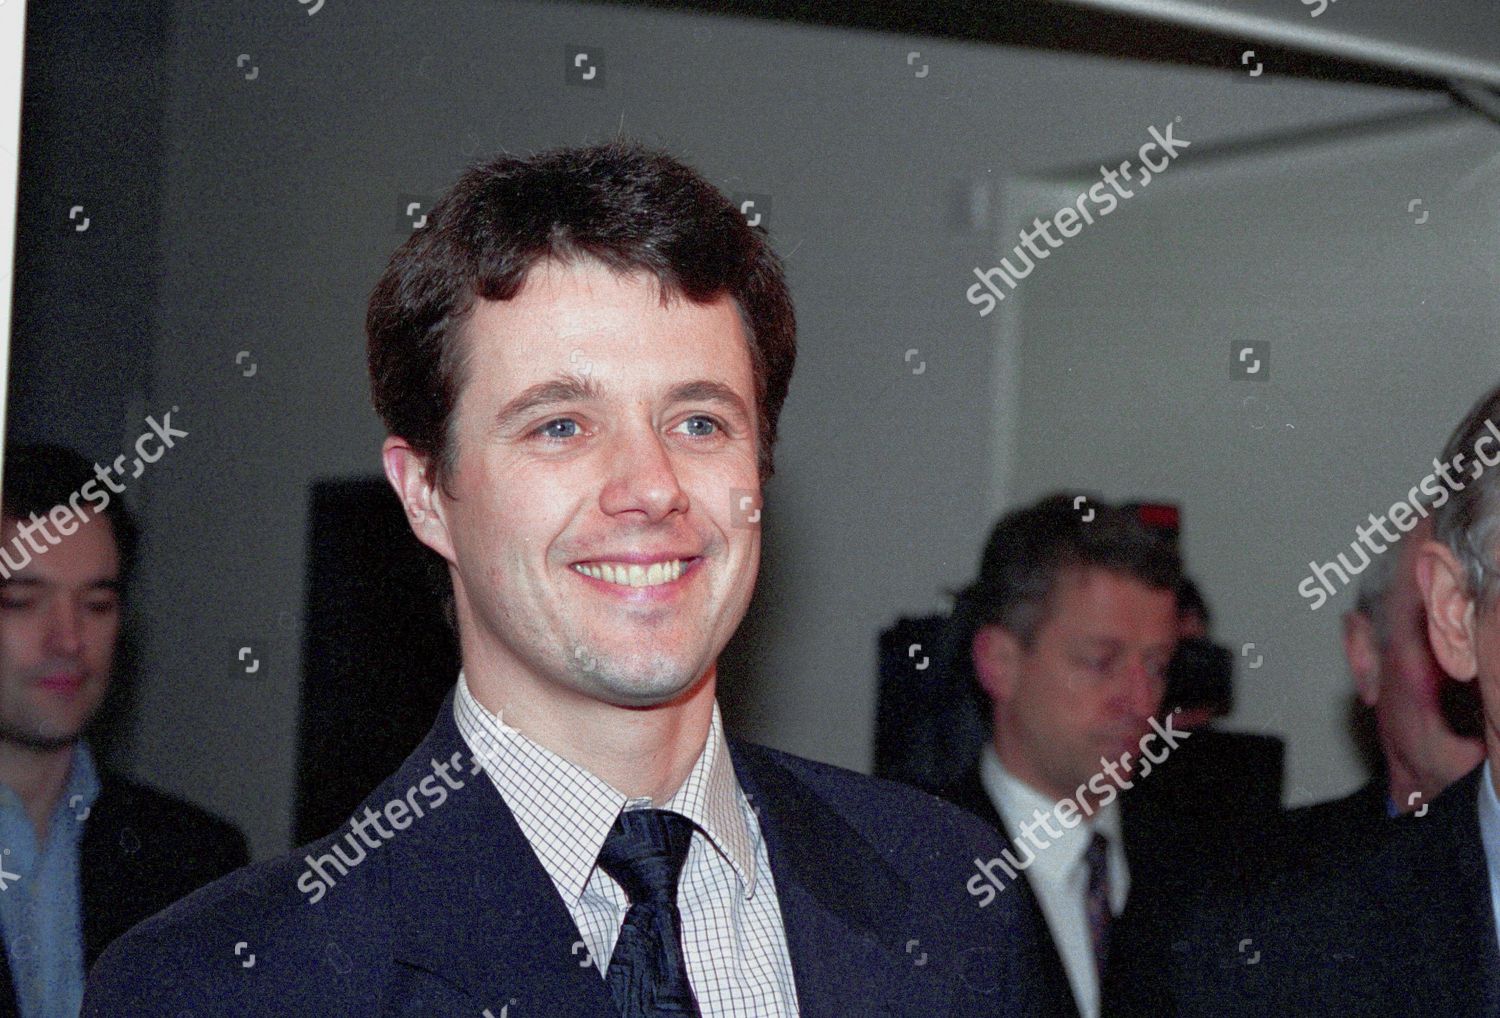 crown-prince-frederik-opening-the-never-green-and-ever-green-exhibition-denmark-shutterstock-editorial-376829f.jpg